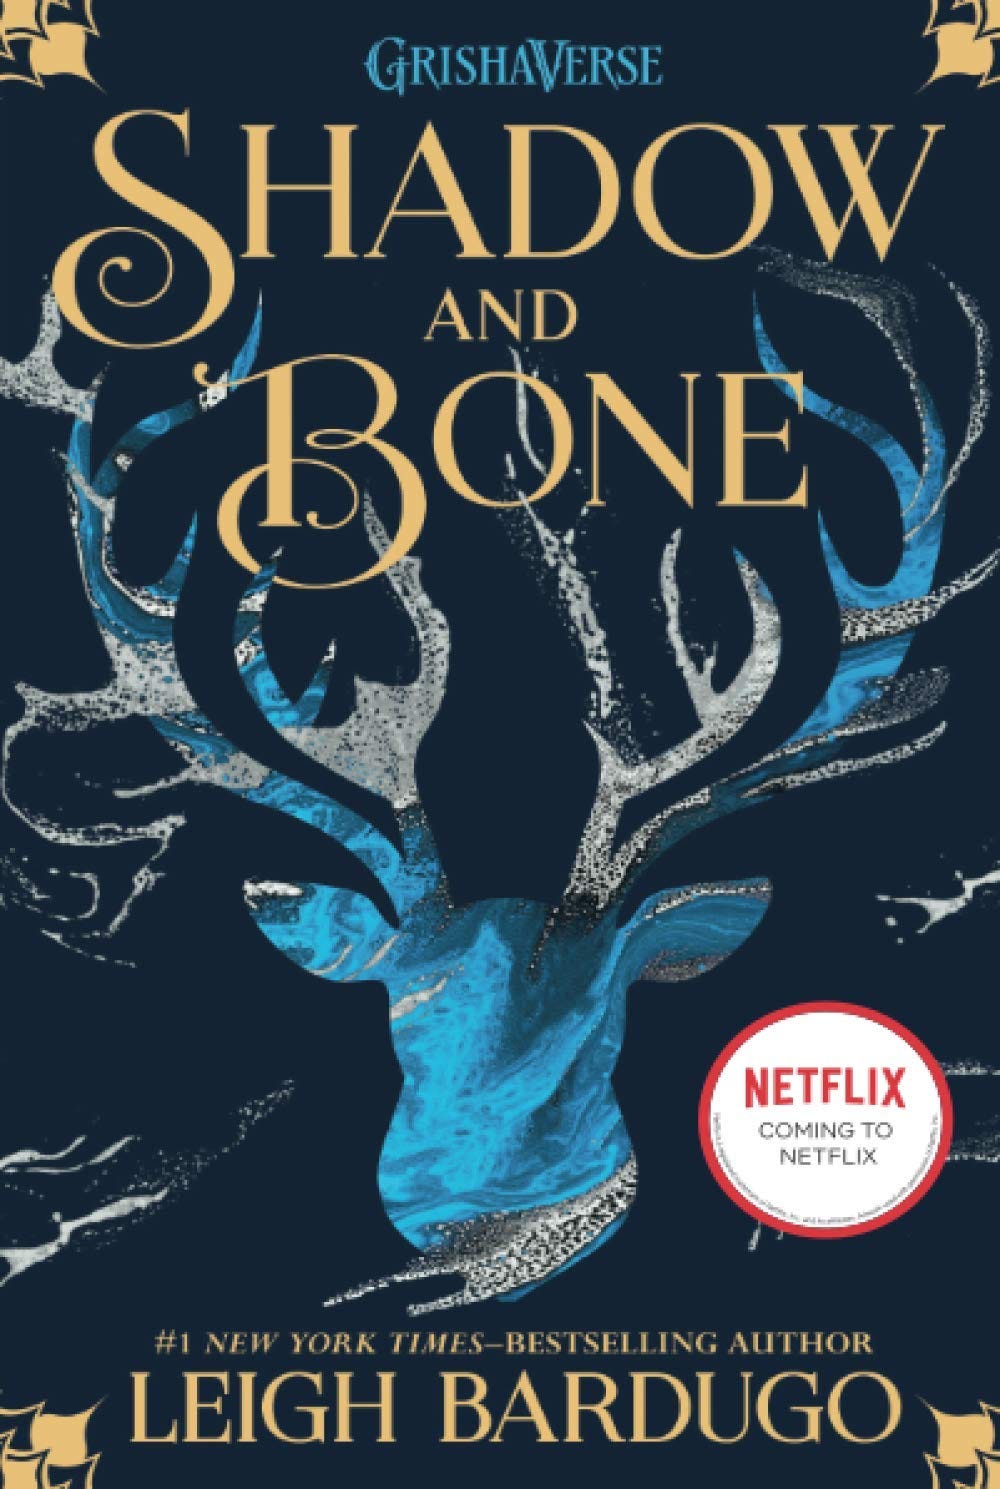 The navy blue cover of Shadow and Bone by Leigh Bardugo, depicting a light blue and gray stag and the rest of the text in gold, swirling font. 